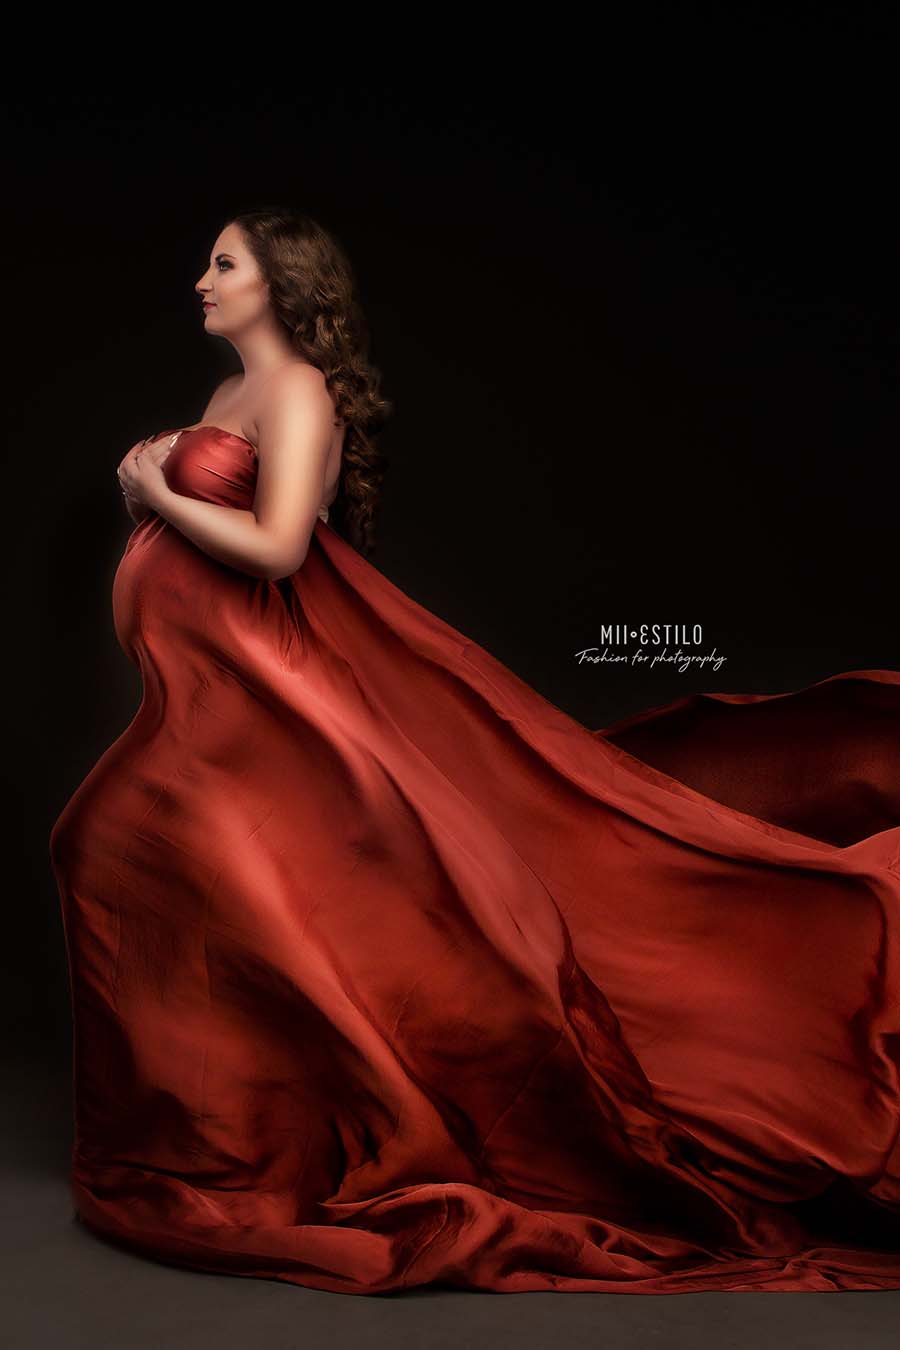 pregnant model poses in a studio against a dark background wearing a rust orange silky scarf to cover her body. she is posing on her side and holds the scarf against her body.